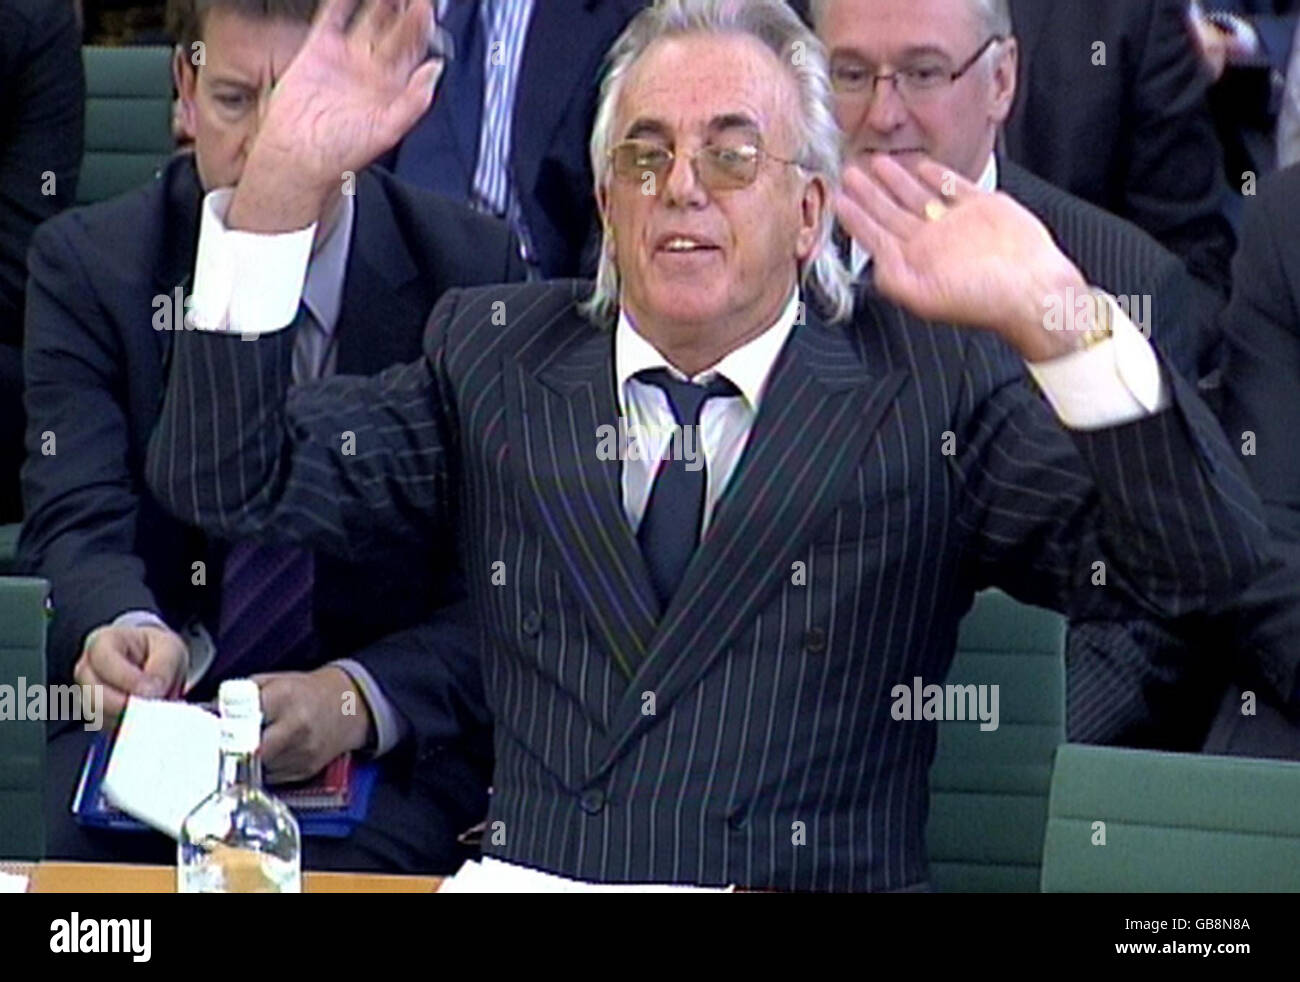 Peter Stringfellow gives evidence to the Culture, Media and Sport select committee in the House of Commons, London, who are investigating the licensing of lapdance clubs. Stock Photo